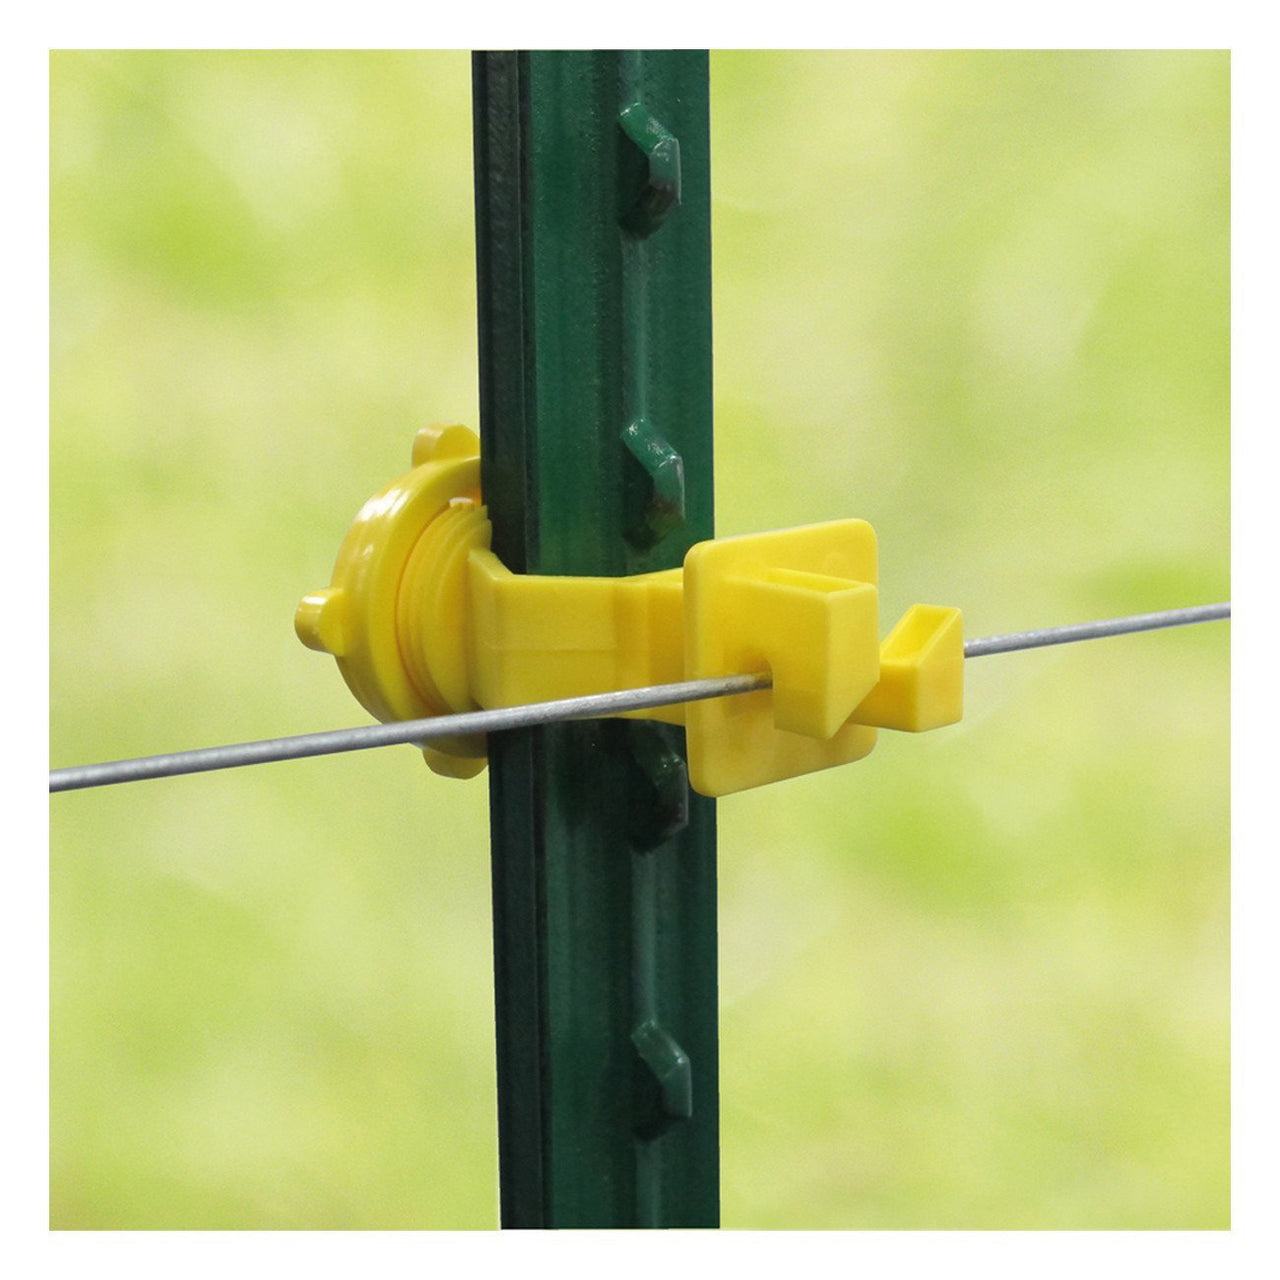 Patriot T-Post Screw On Insulator - Yellow (25 Pack) - Fencing Patriot - Canada